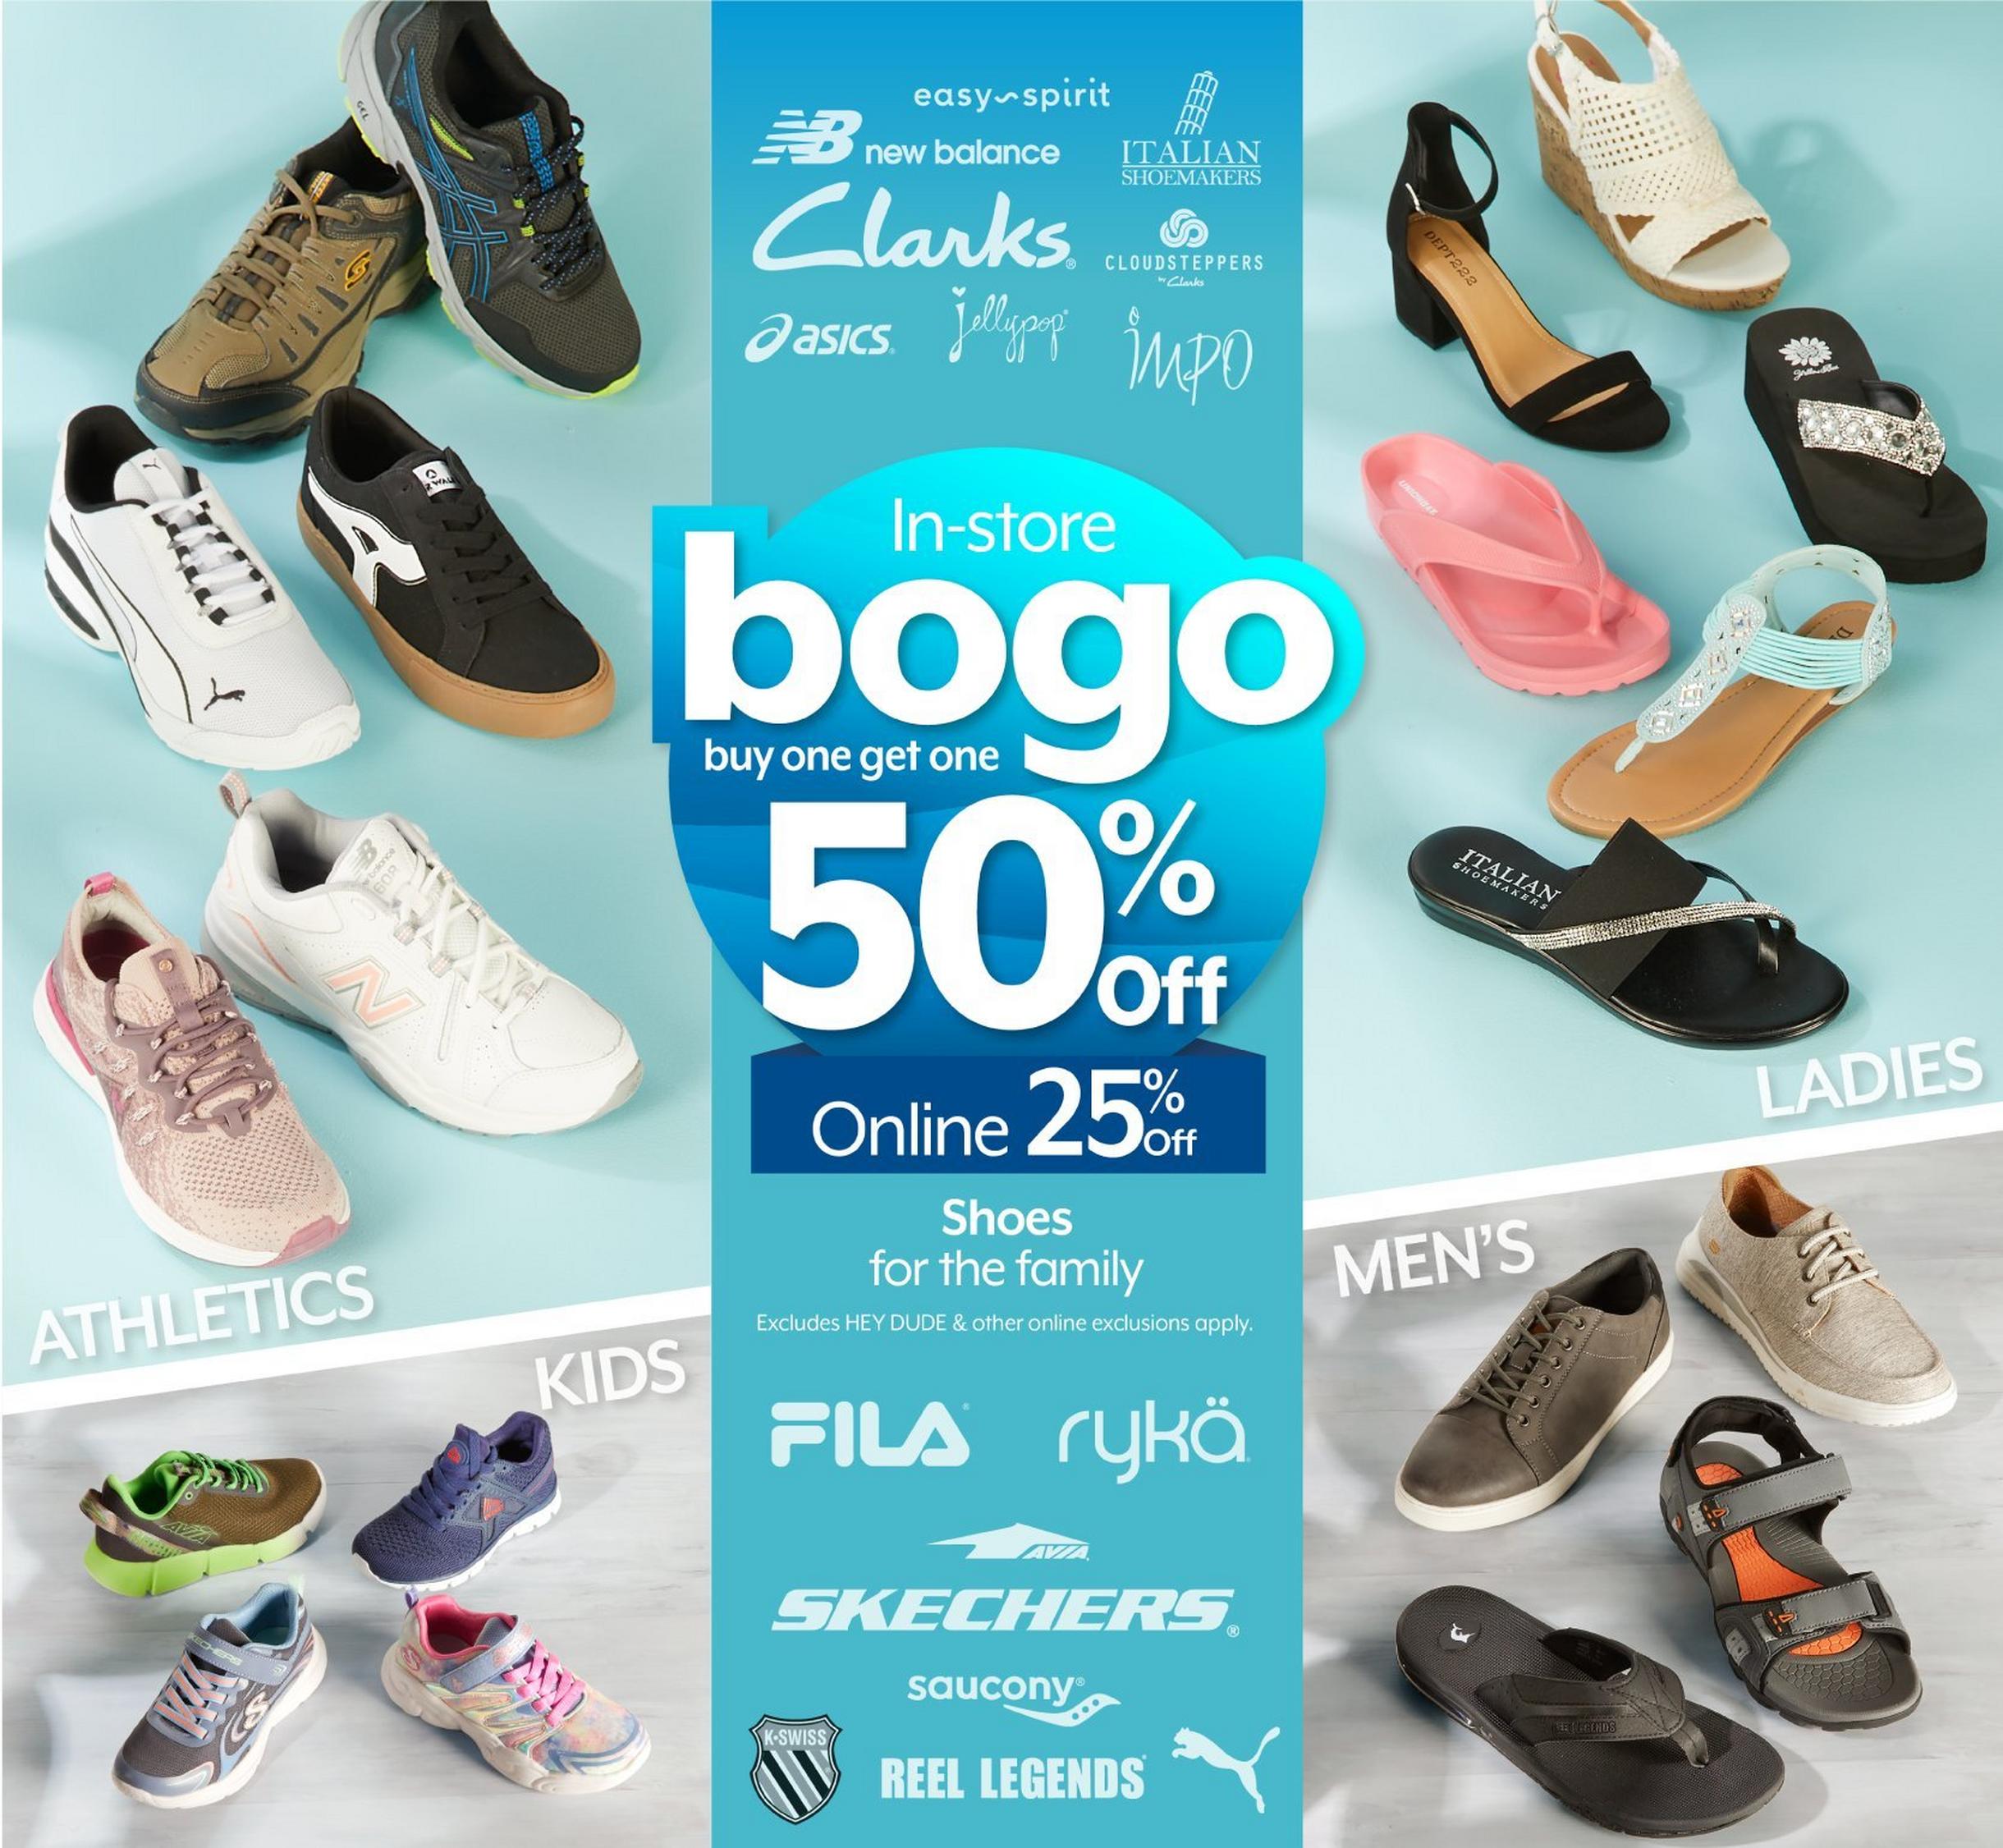 BOGO 50% off in-store. 25% off online Shoes for the family. Excludes HEY DUDE®